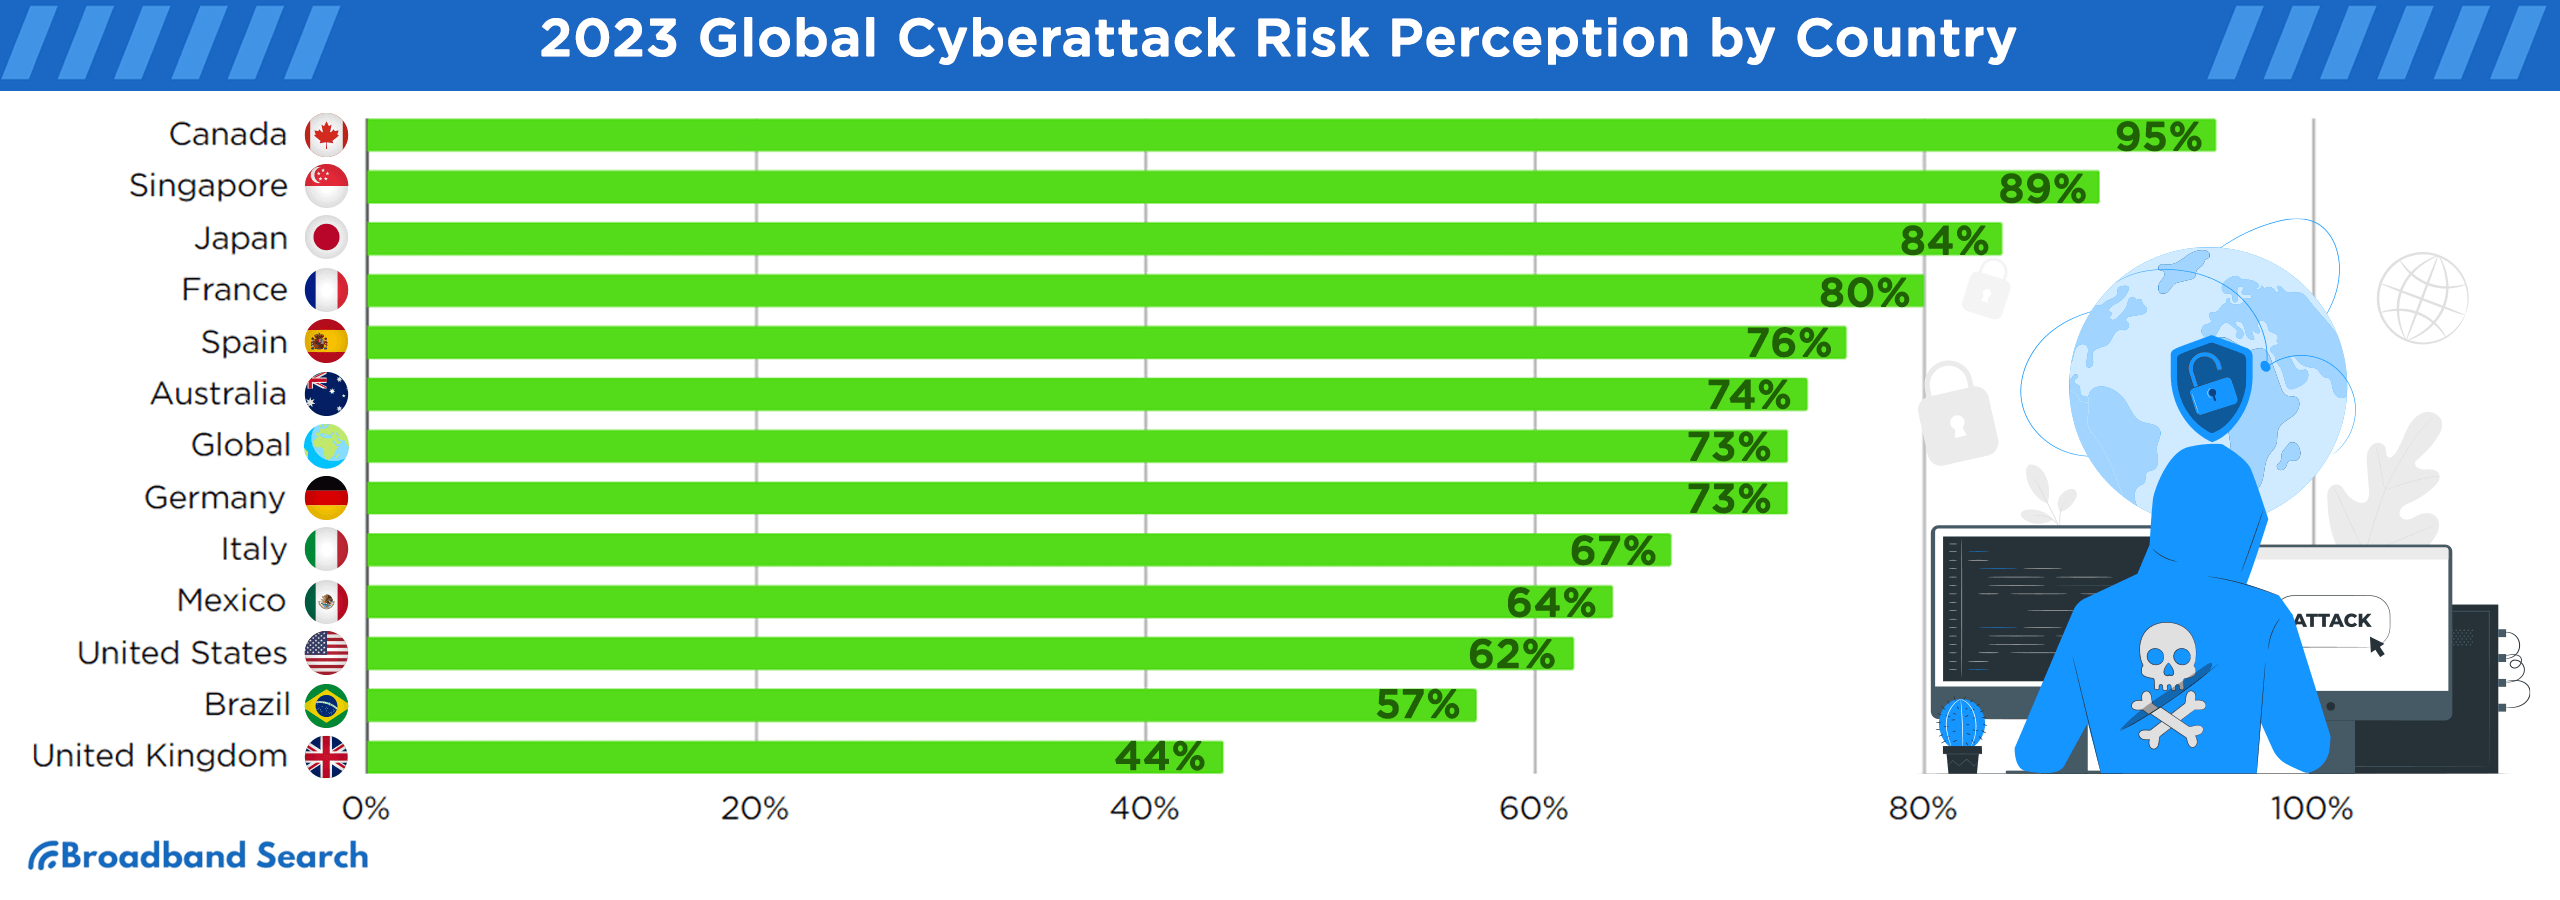 2023 global cyberattack risk perception by country